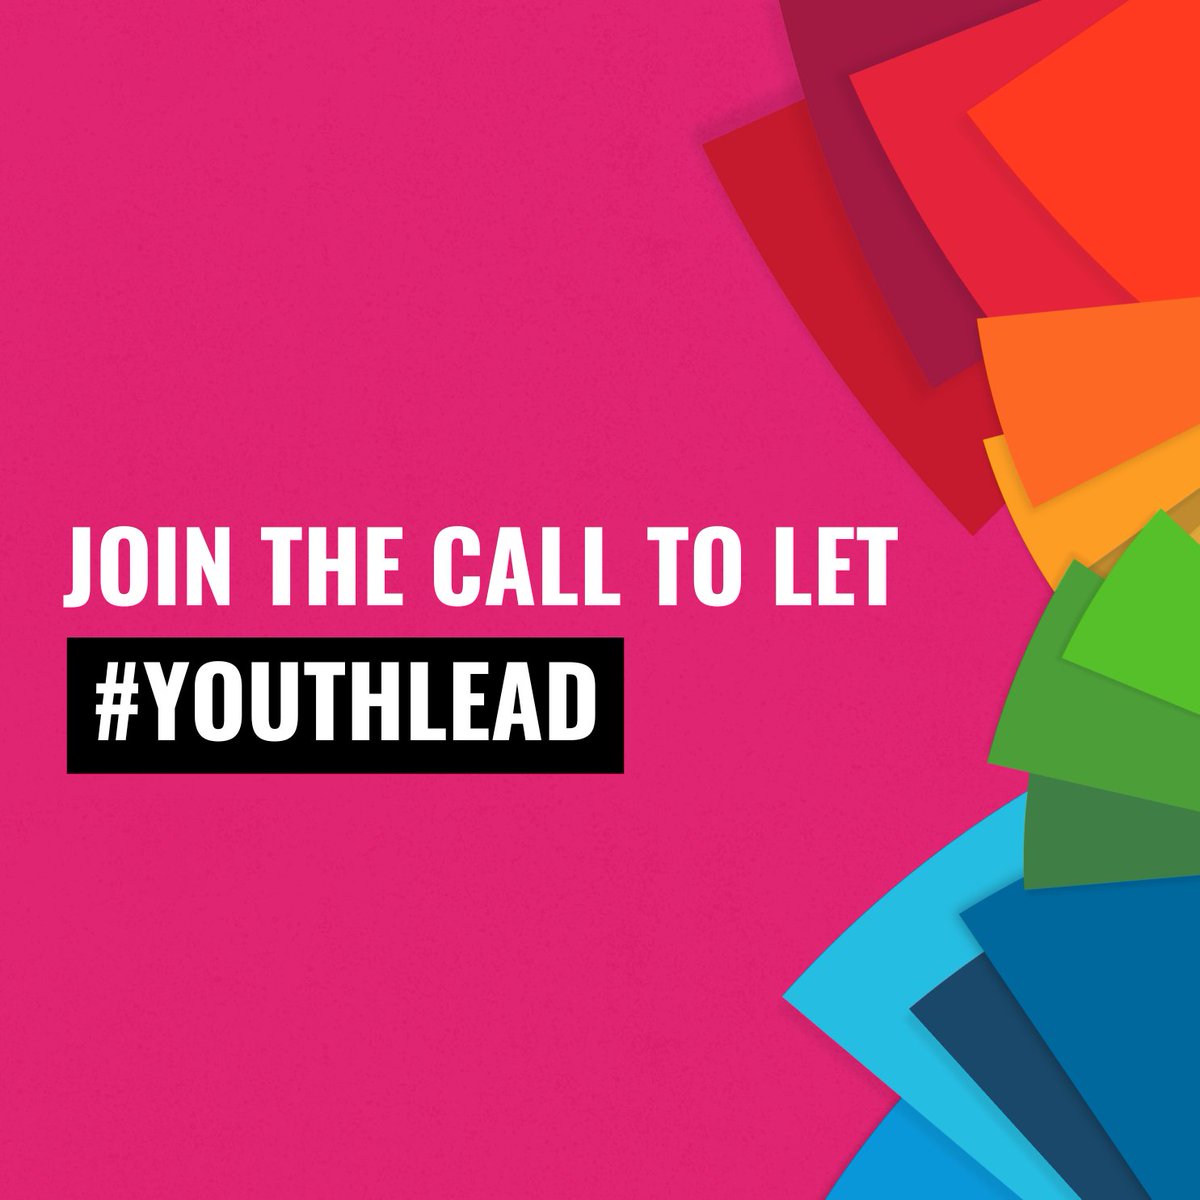 Young people should constructively influence areas that impact their lives by participating in: ✔️peace efforts ✔️decision-making ✔️reform processes Sign the open letter: ow.ly/Tcjk50RmZWE